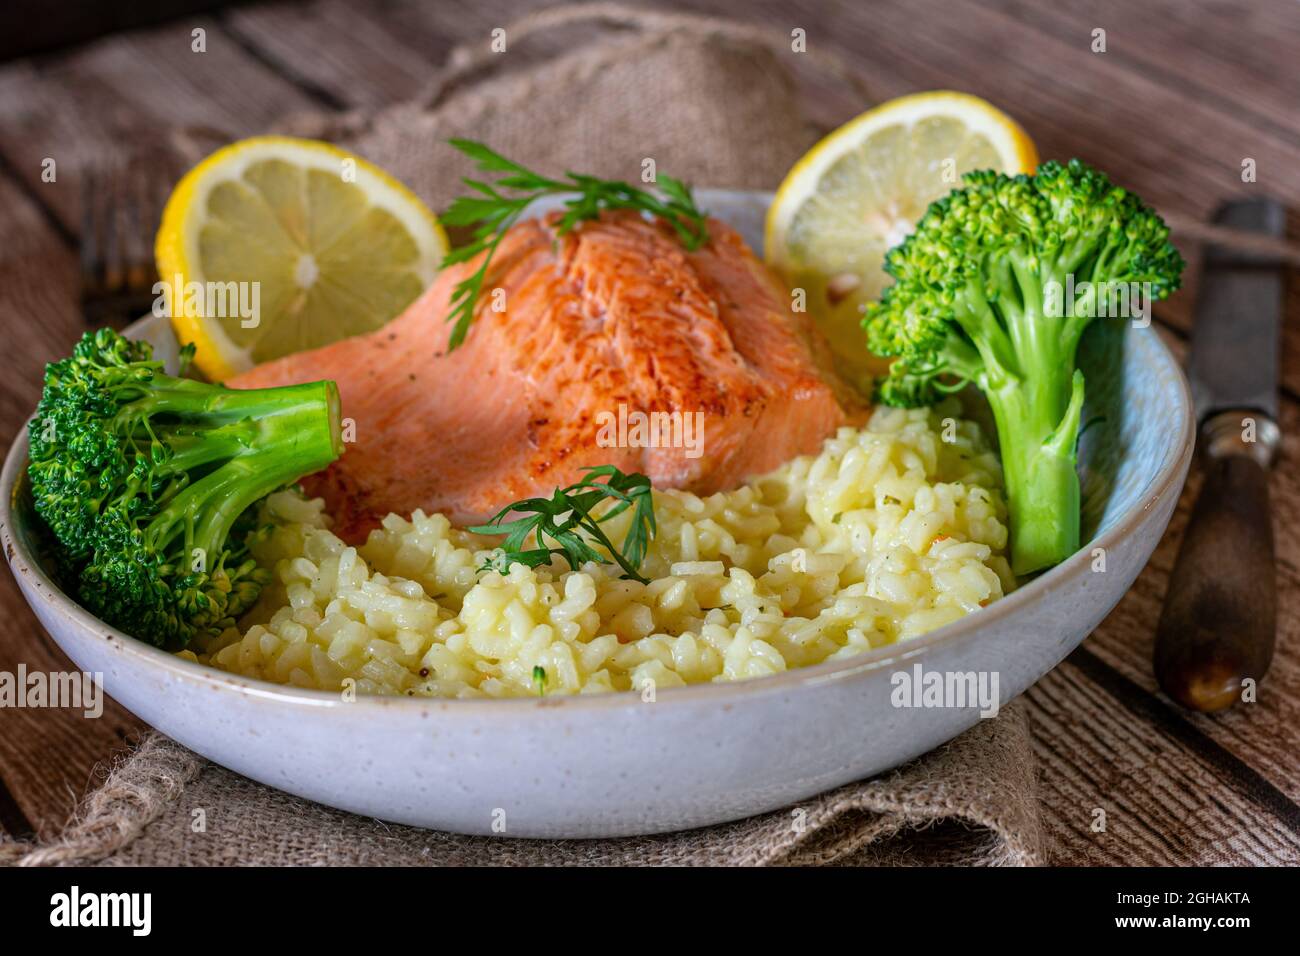 Fitness meal with salmon fillet, light risotto and broccoli isolated on wooden table. Closeup, front view Stock Photo